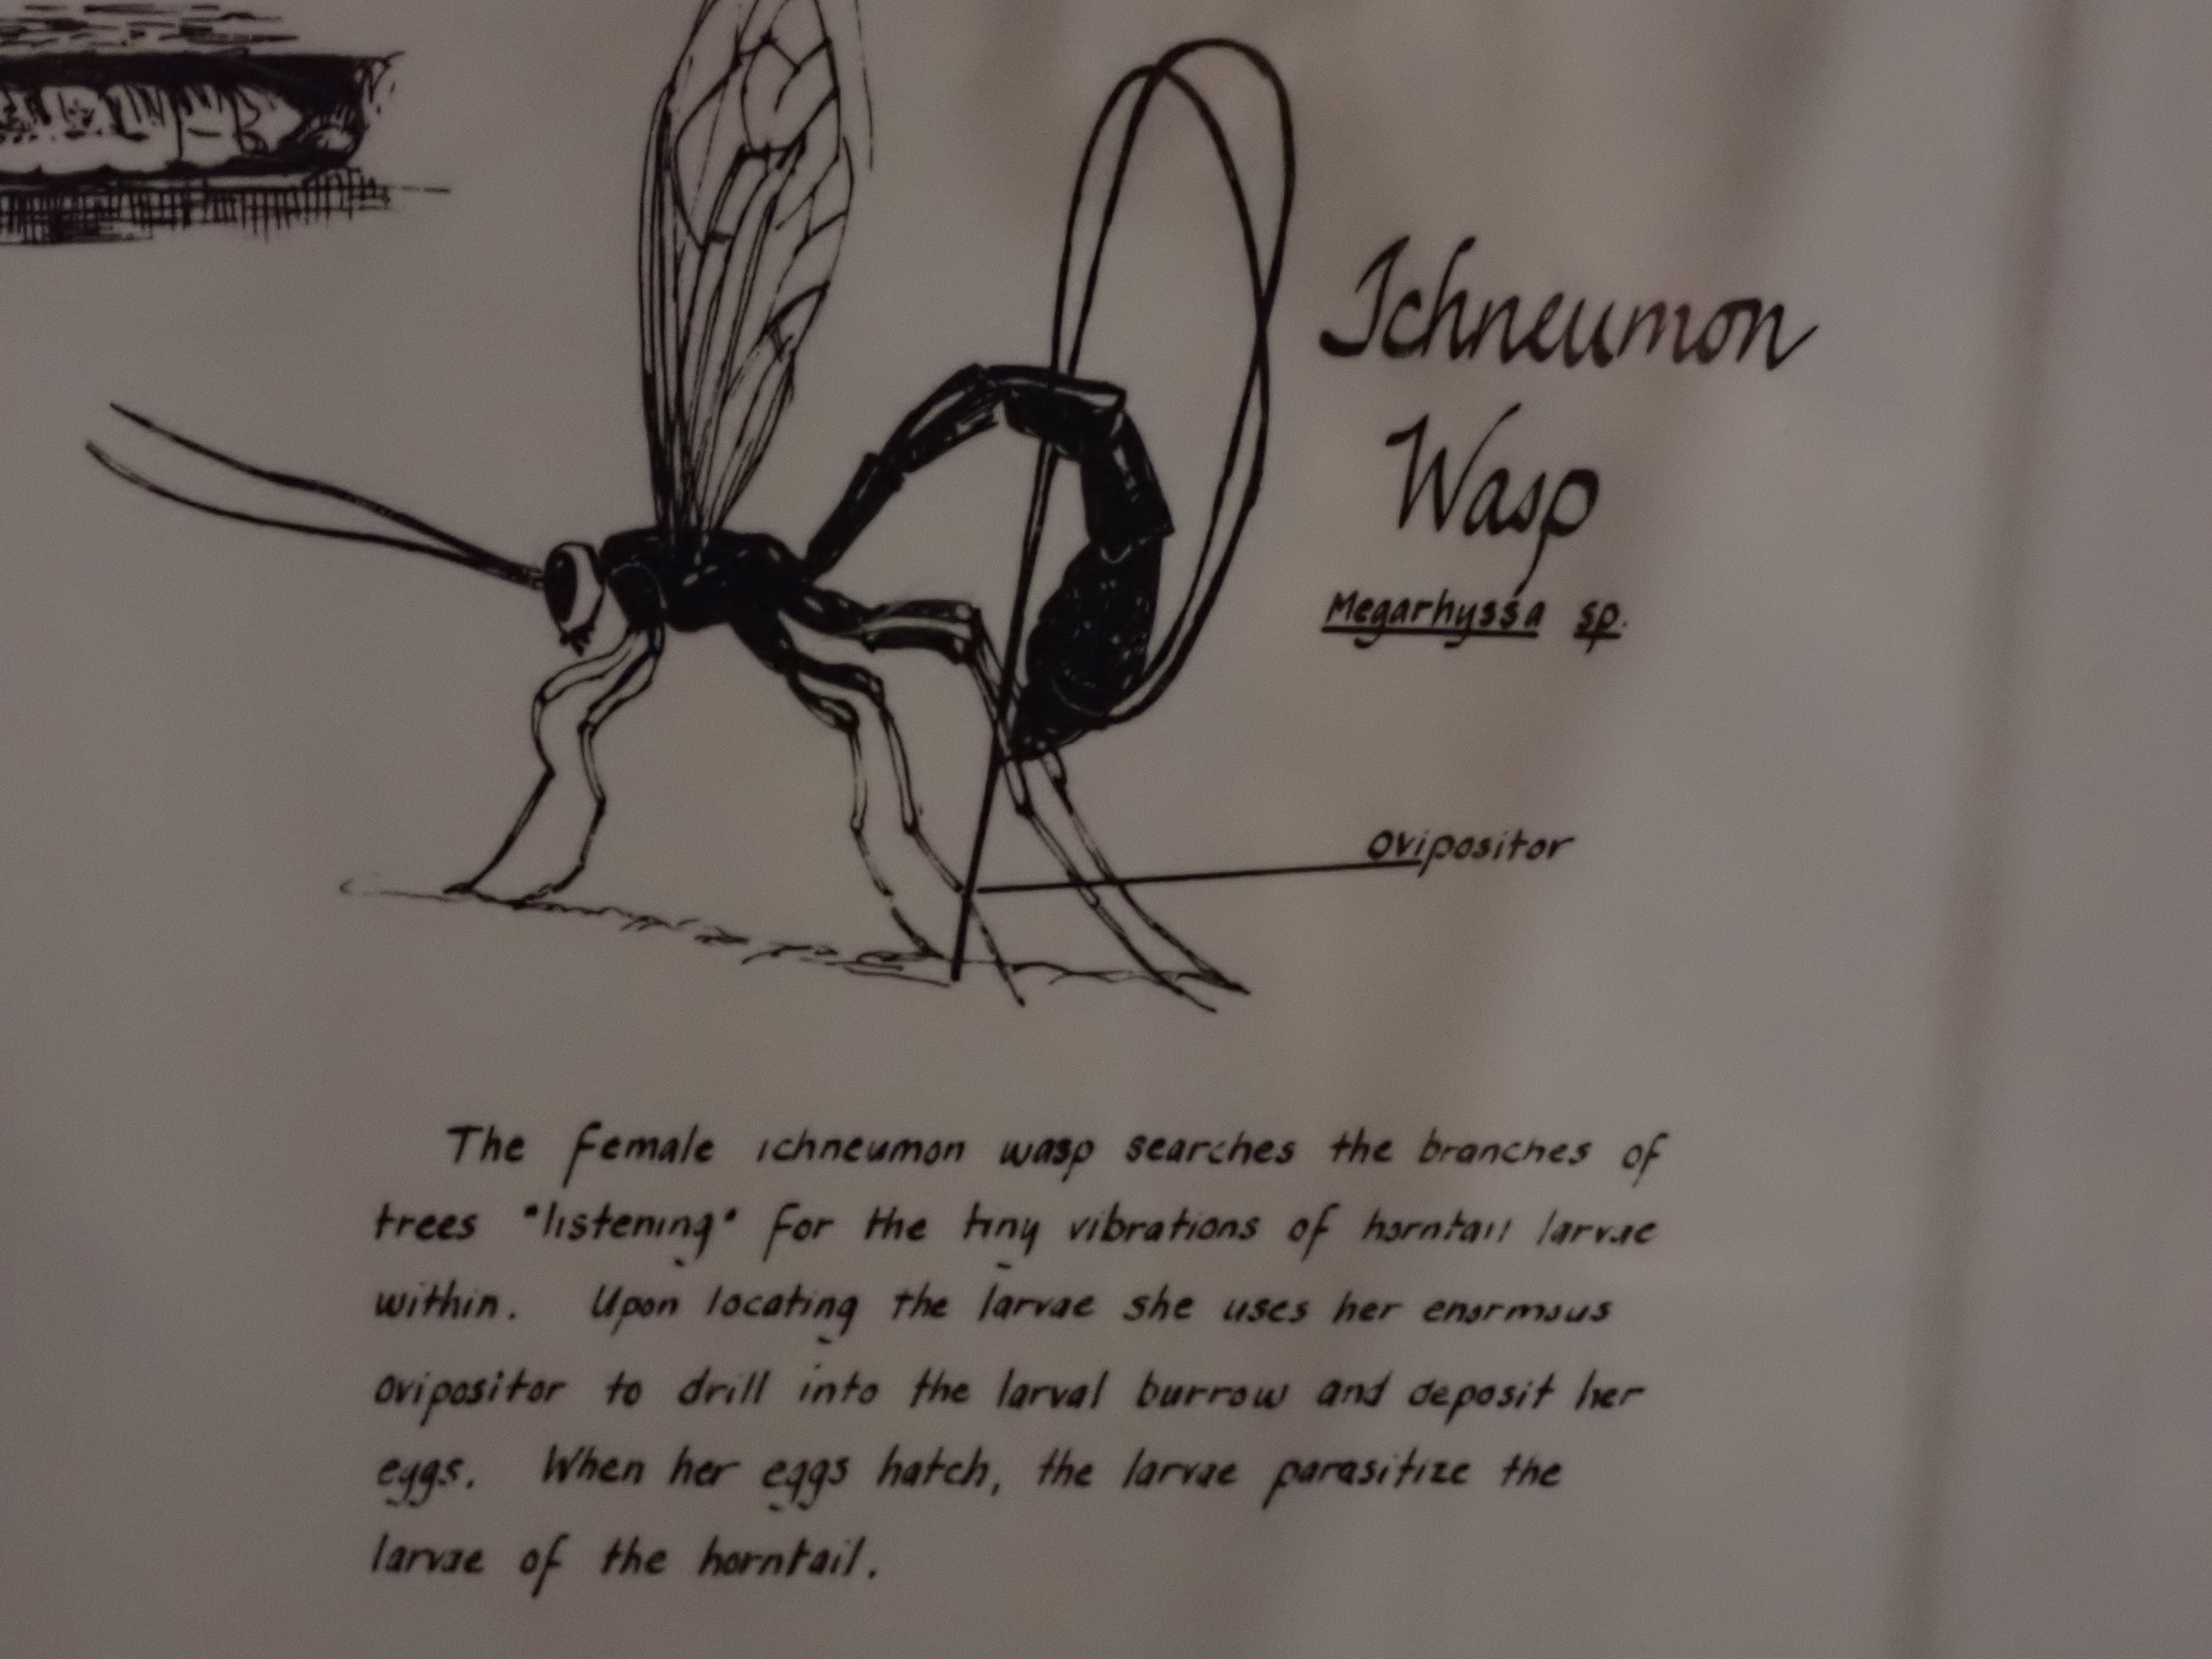 a drawing of an ichneumonid wasp ovipositing with the caption 'the female ichneumon wasp searches the branches of trees 'listening' for the tiny vibrations of horntail larvae within. Upon locating the larvae she uses her enormous ovipositor to drill into the larval burrow and deposit her eggs. When her eggs hatch, the larvae parasitize the larvae of the horntail.